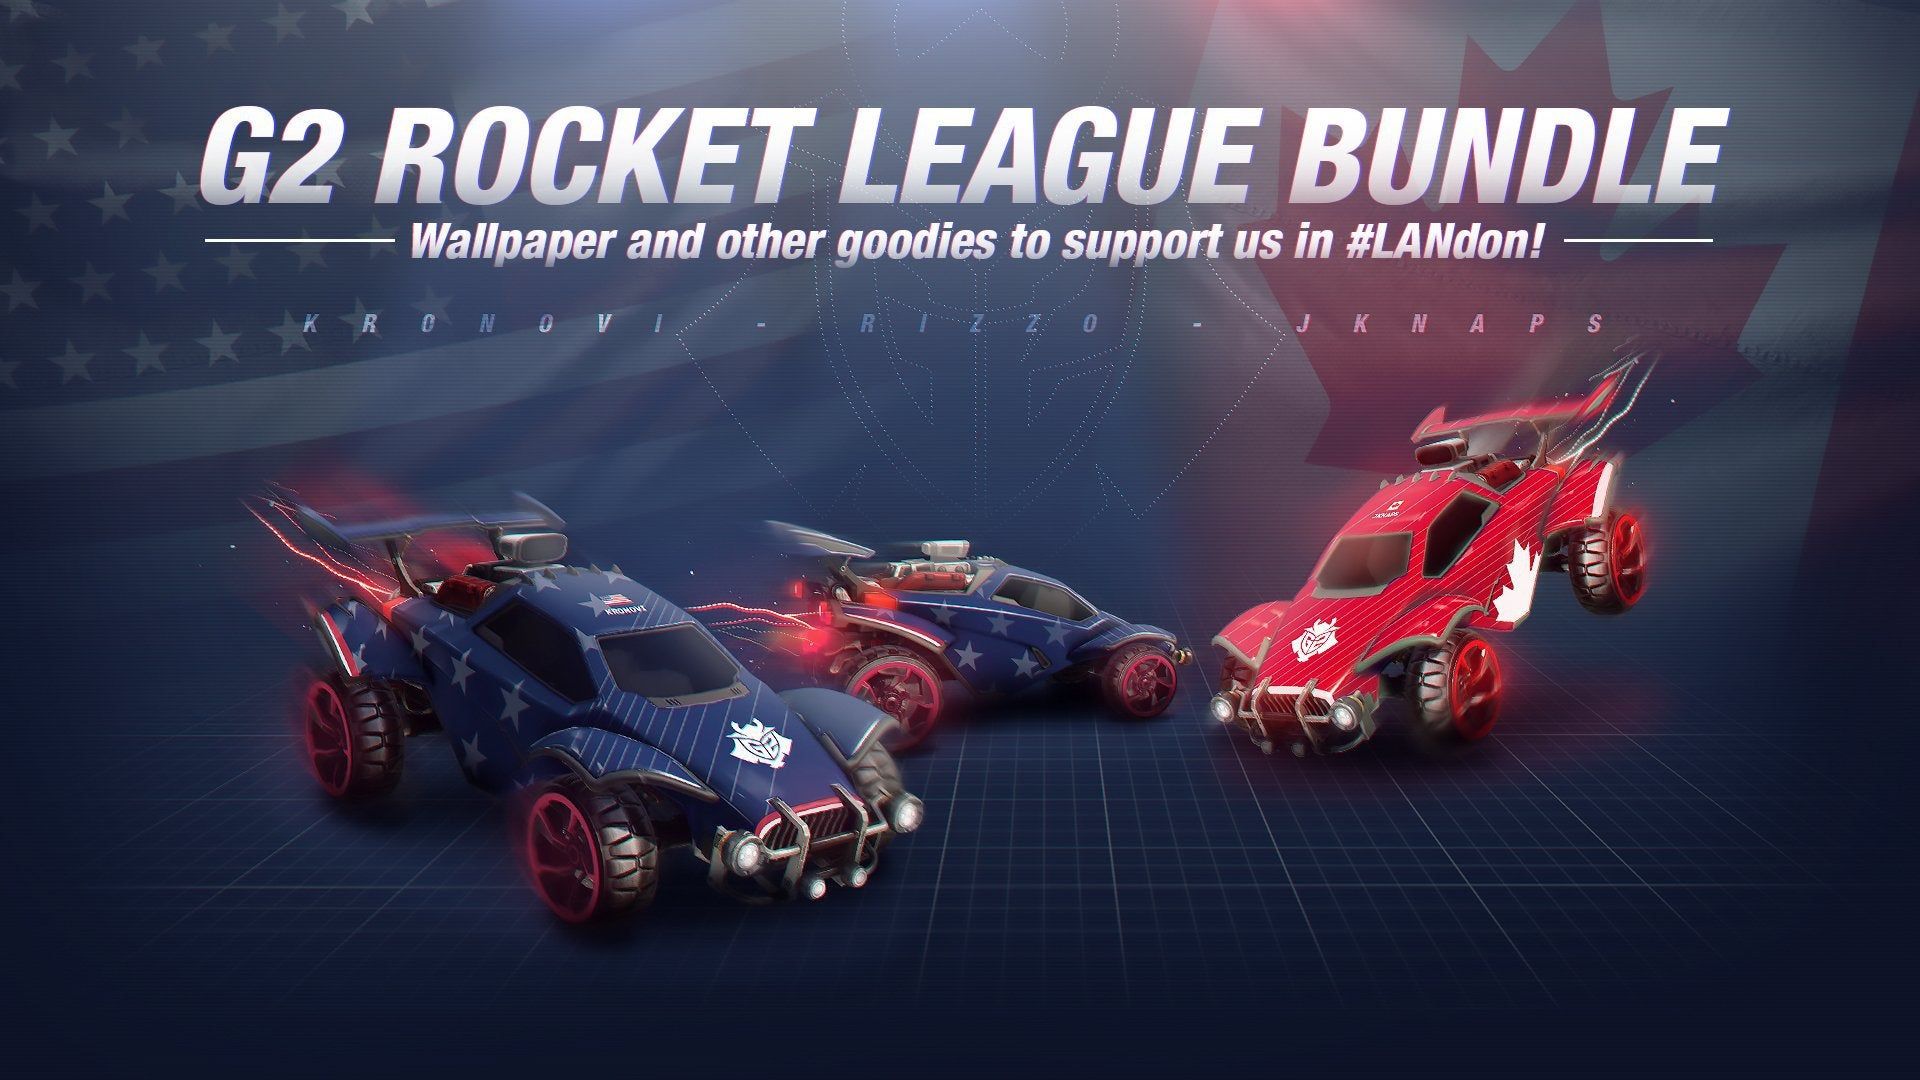 Really hope we get surprised with team uniforms at RLCS. These G2